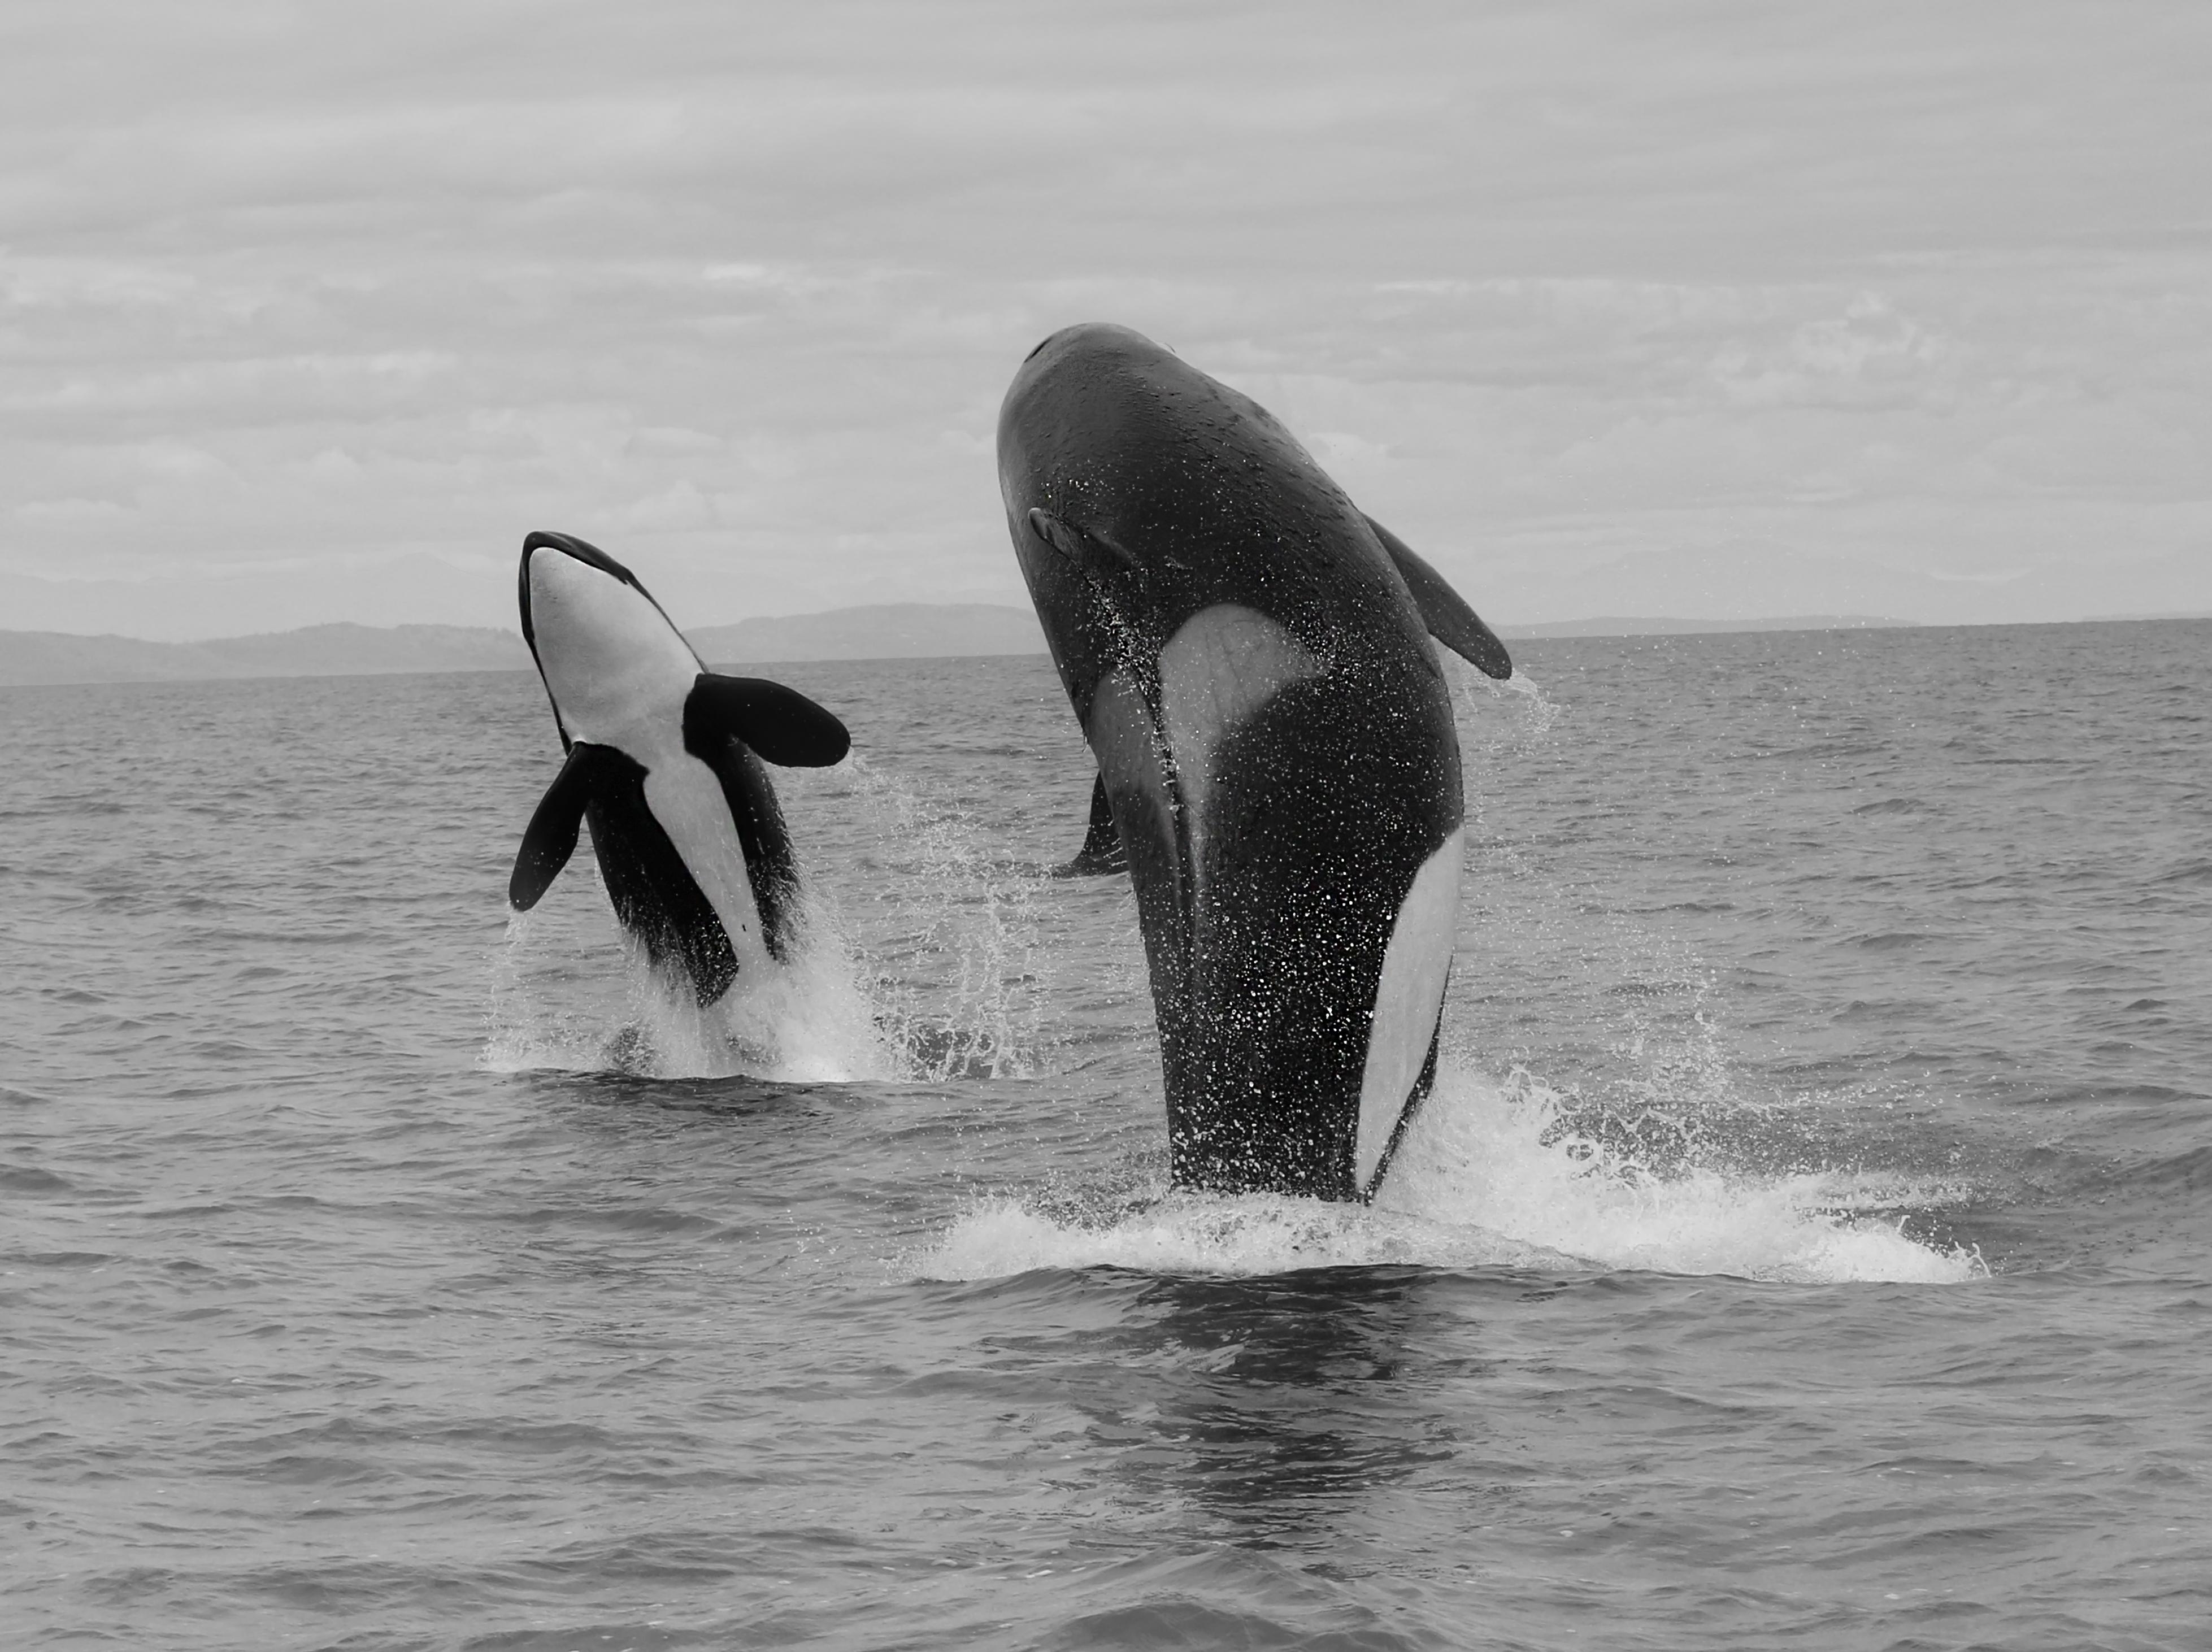 Shane Russeck Animal Print - "Orca Double Breach" 50x60 Black and White, Killer Whale Photography Unisgned